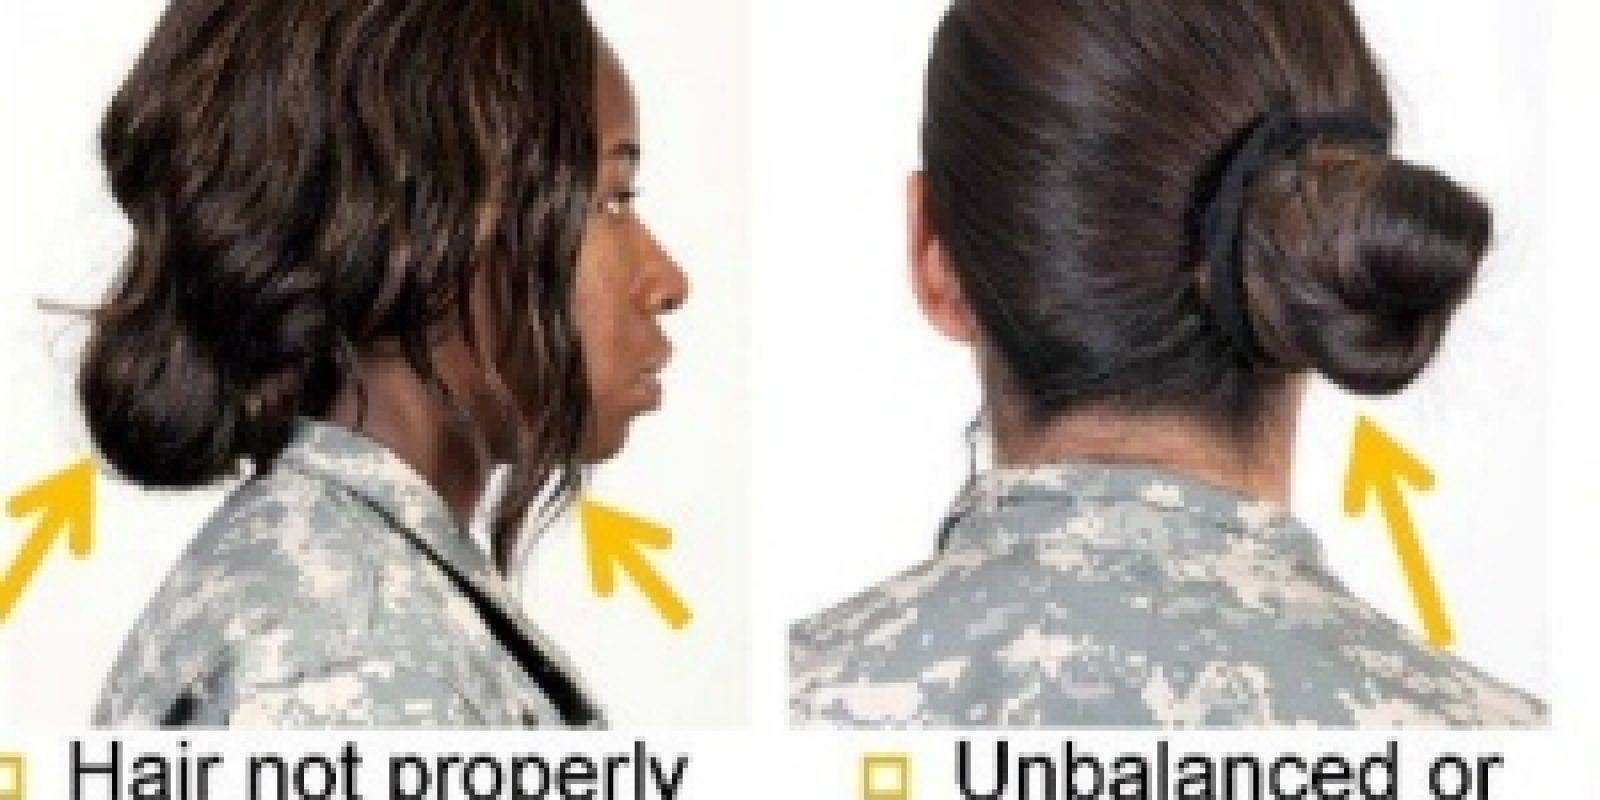 In response to the Army's ban on dreadlocks and other Natural Hairstyles -  Locs Styles, Loctitians, Natural Hairstylists, Braiders & hair care for  Locs and naturals.